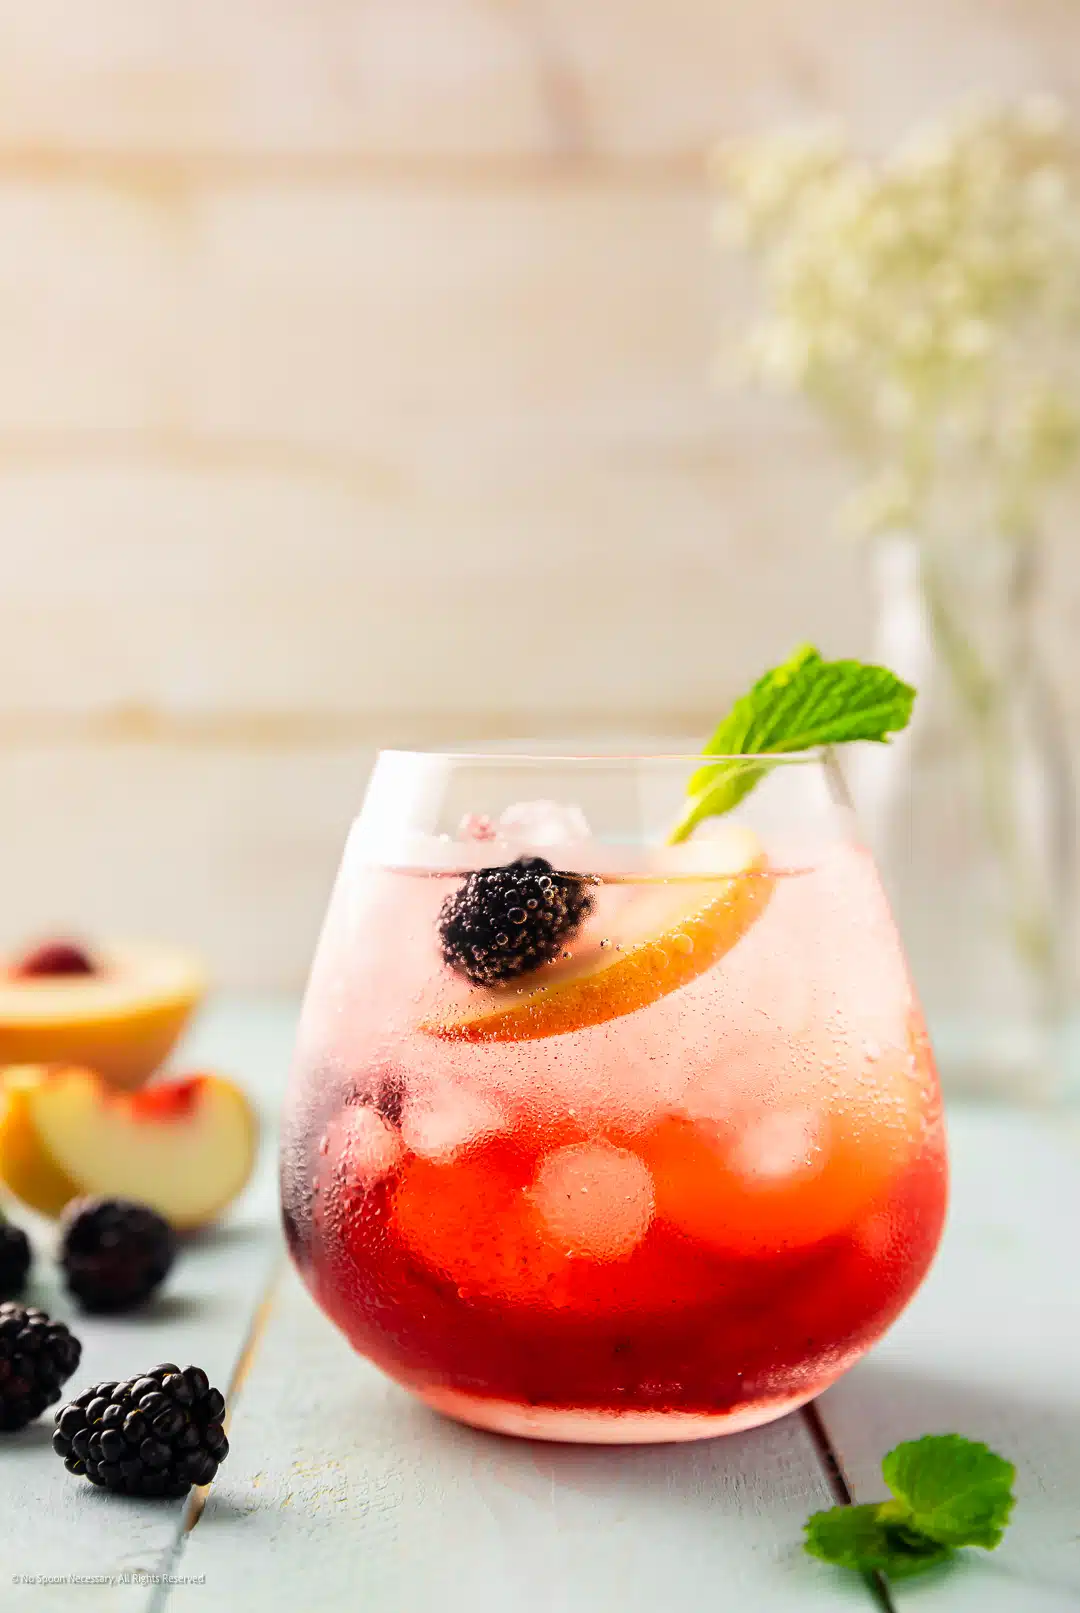 Straight on photo of an elderflower liqueur cocktail with vodka, peaches, and blackberries.